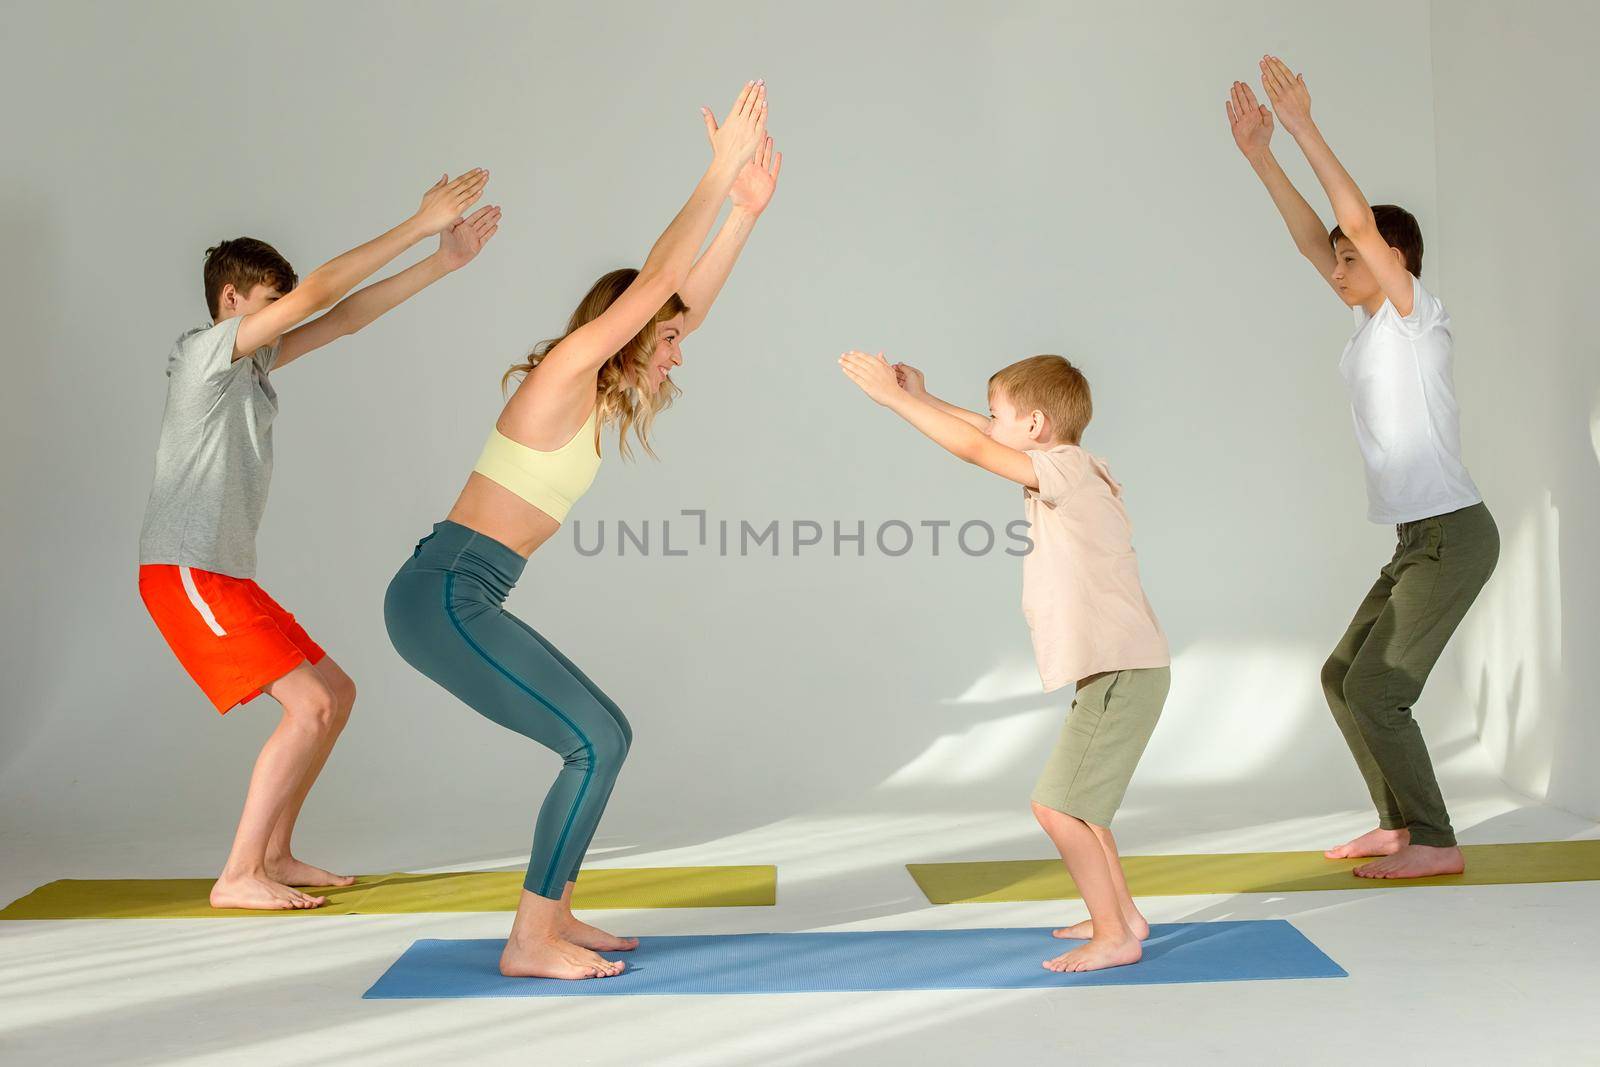 Slim woman, boy and two teenagers perform yoga exercise, stand on mats in chair pose, in sunny studio.